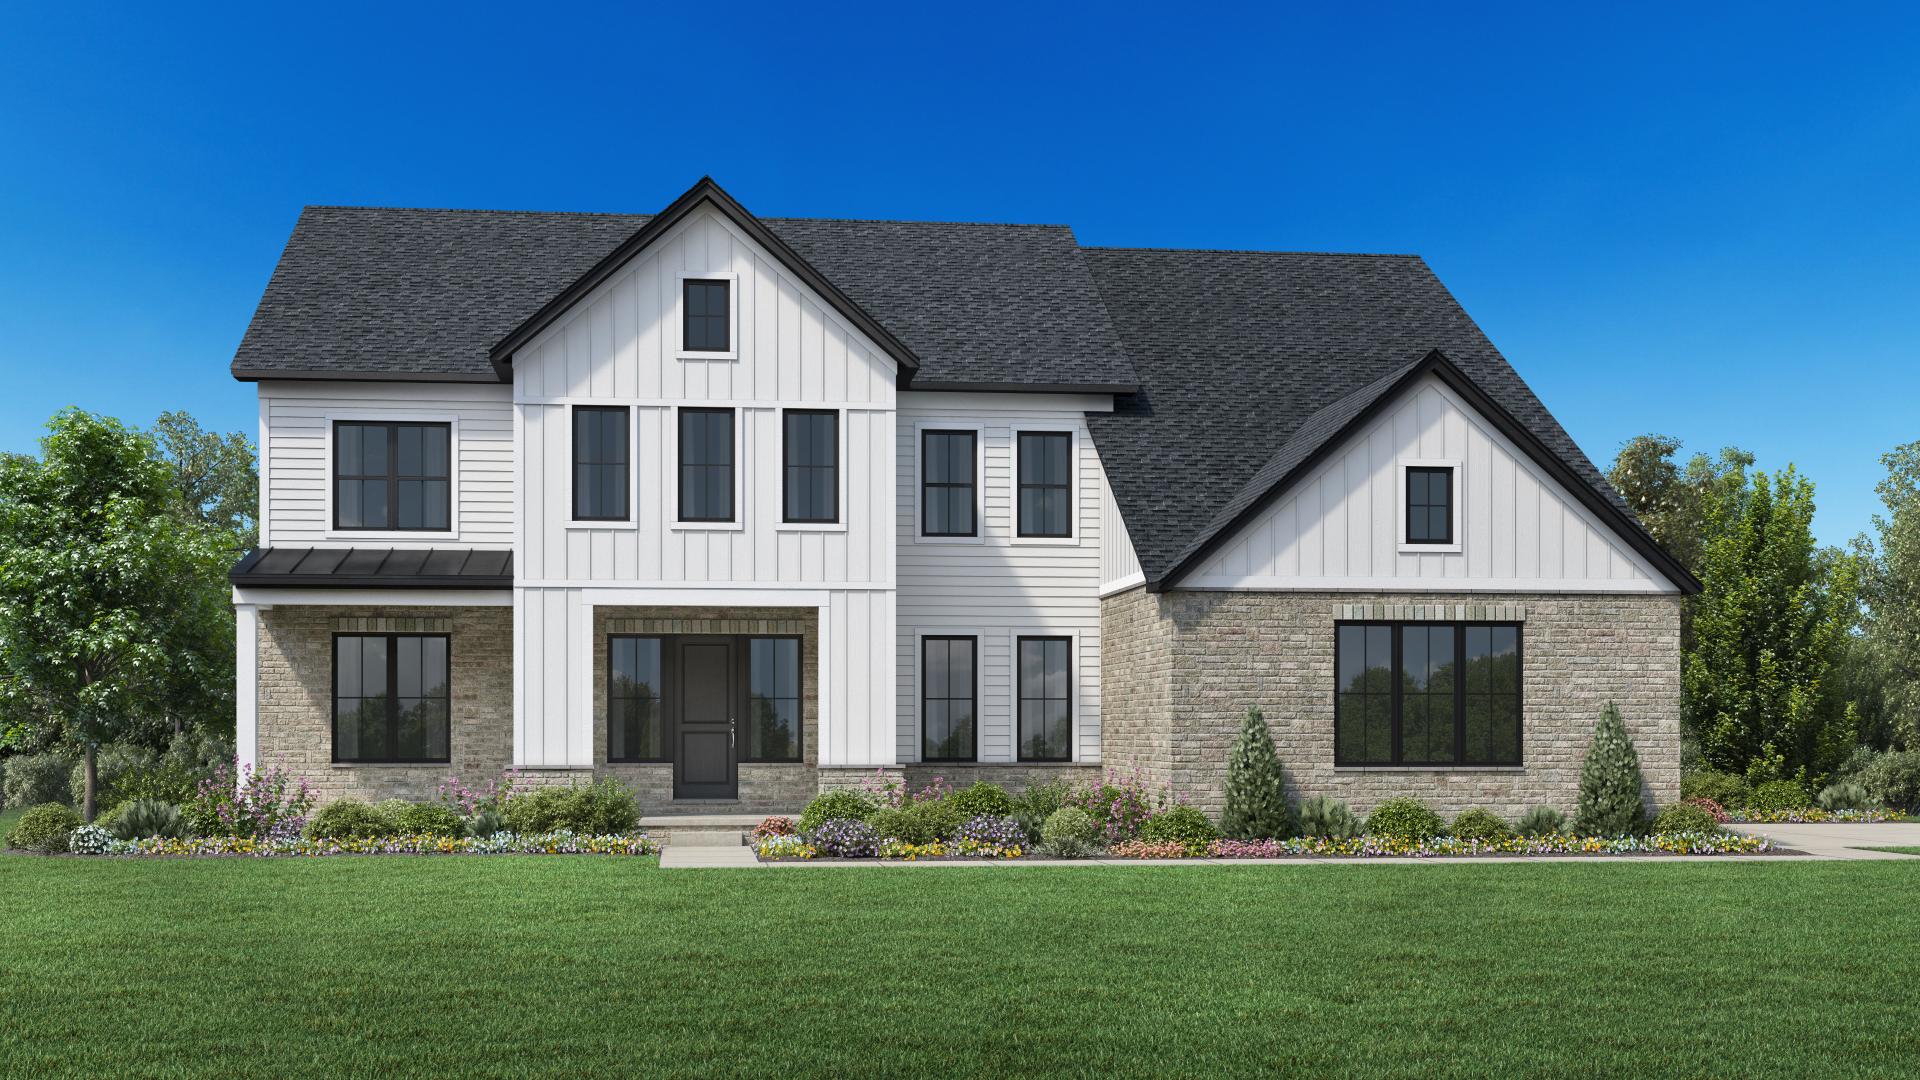 New homes in novi - coming soon from Toll Brothers